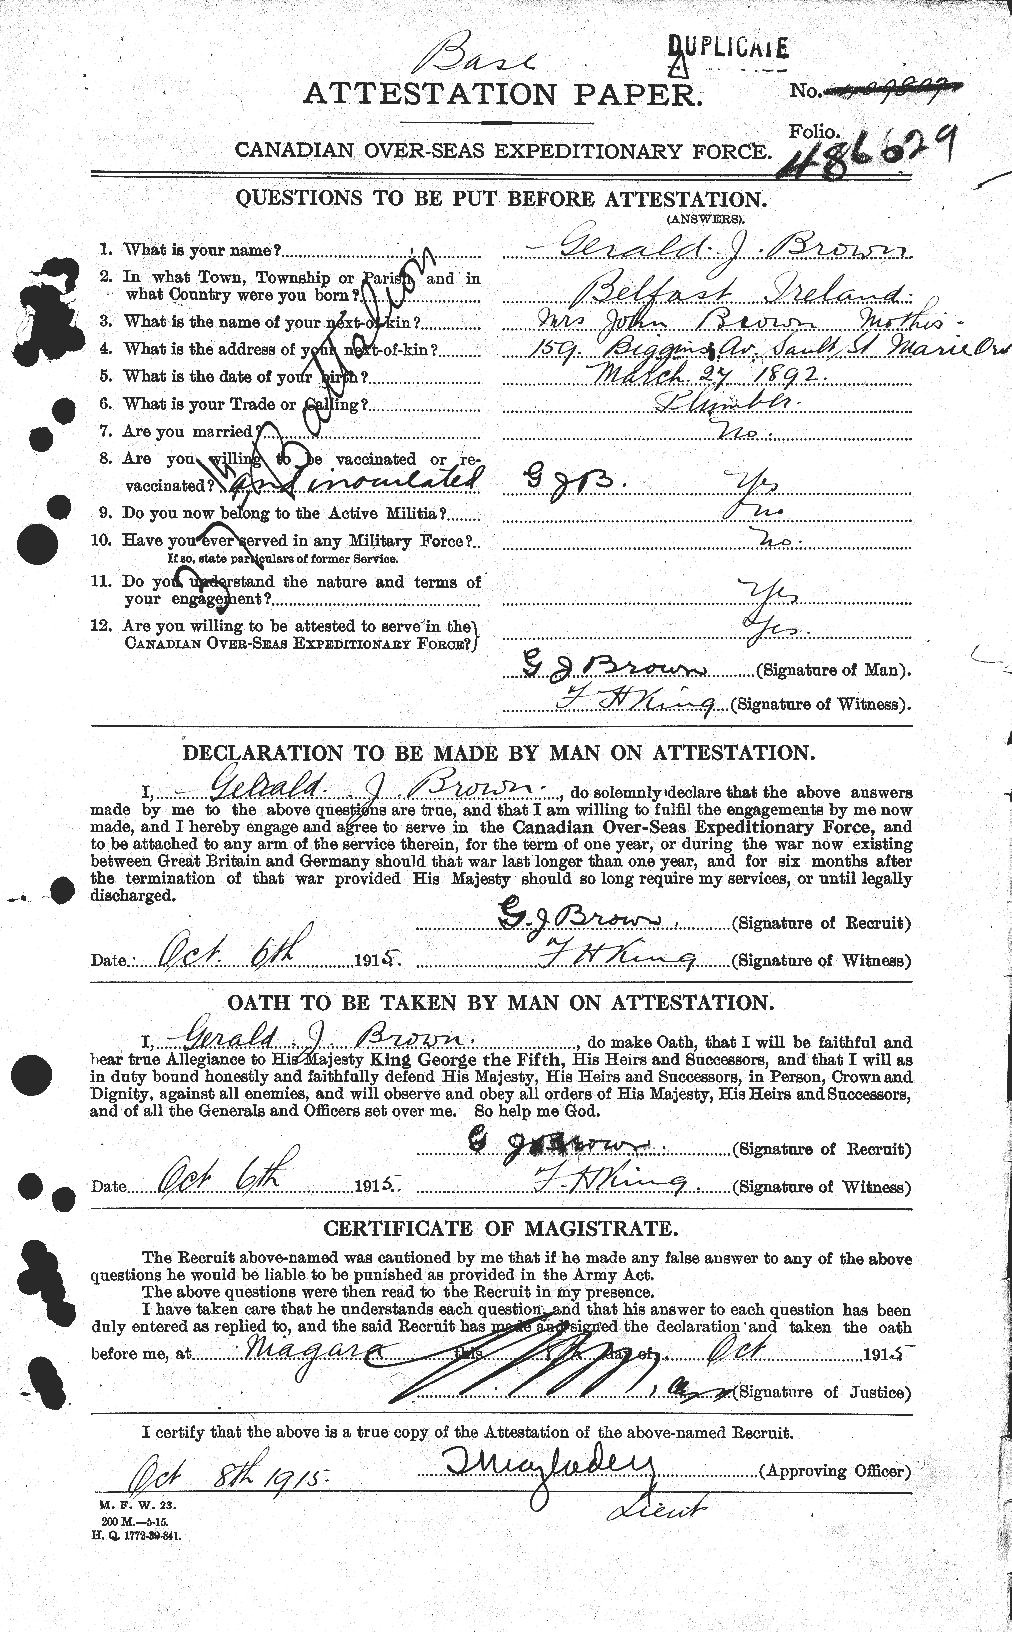 Personnel Records of the First World War - CEF 262605a